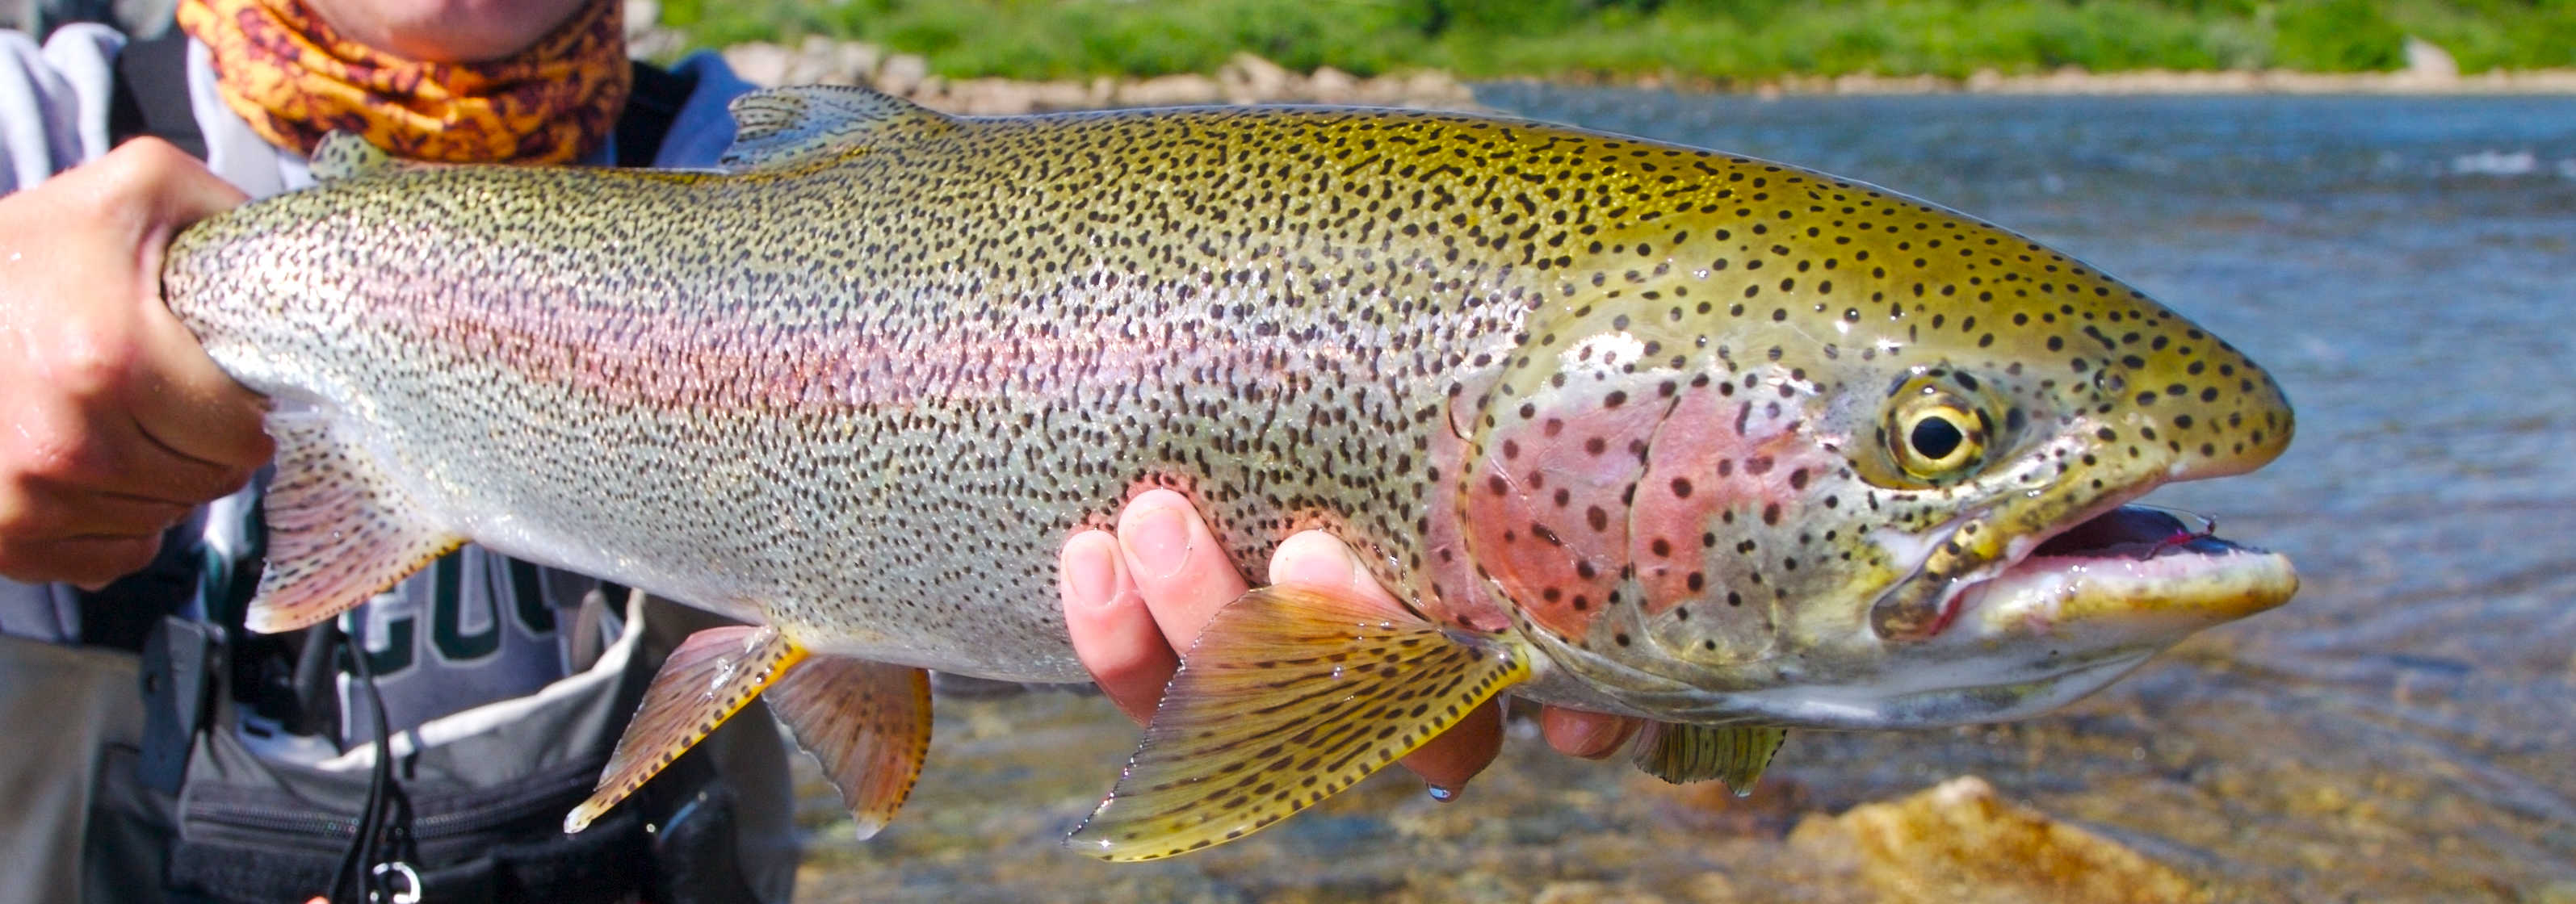 HD Quality Wallpaper | Collection: Animal, 3190x1120 Trout